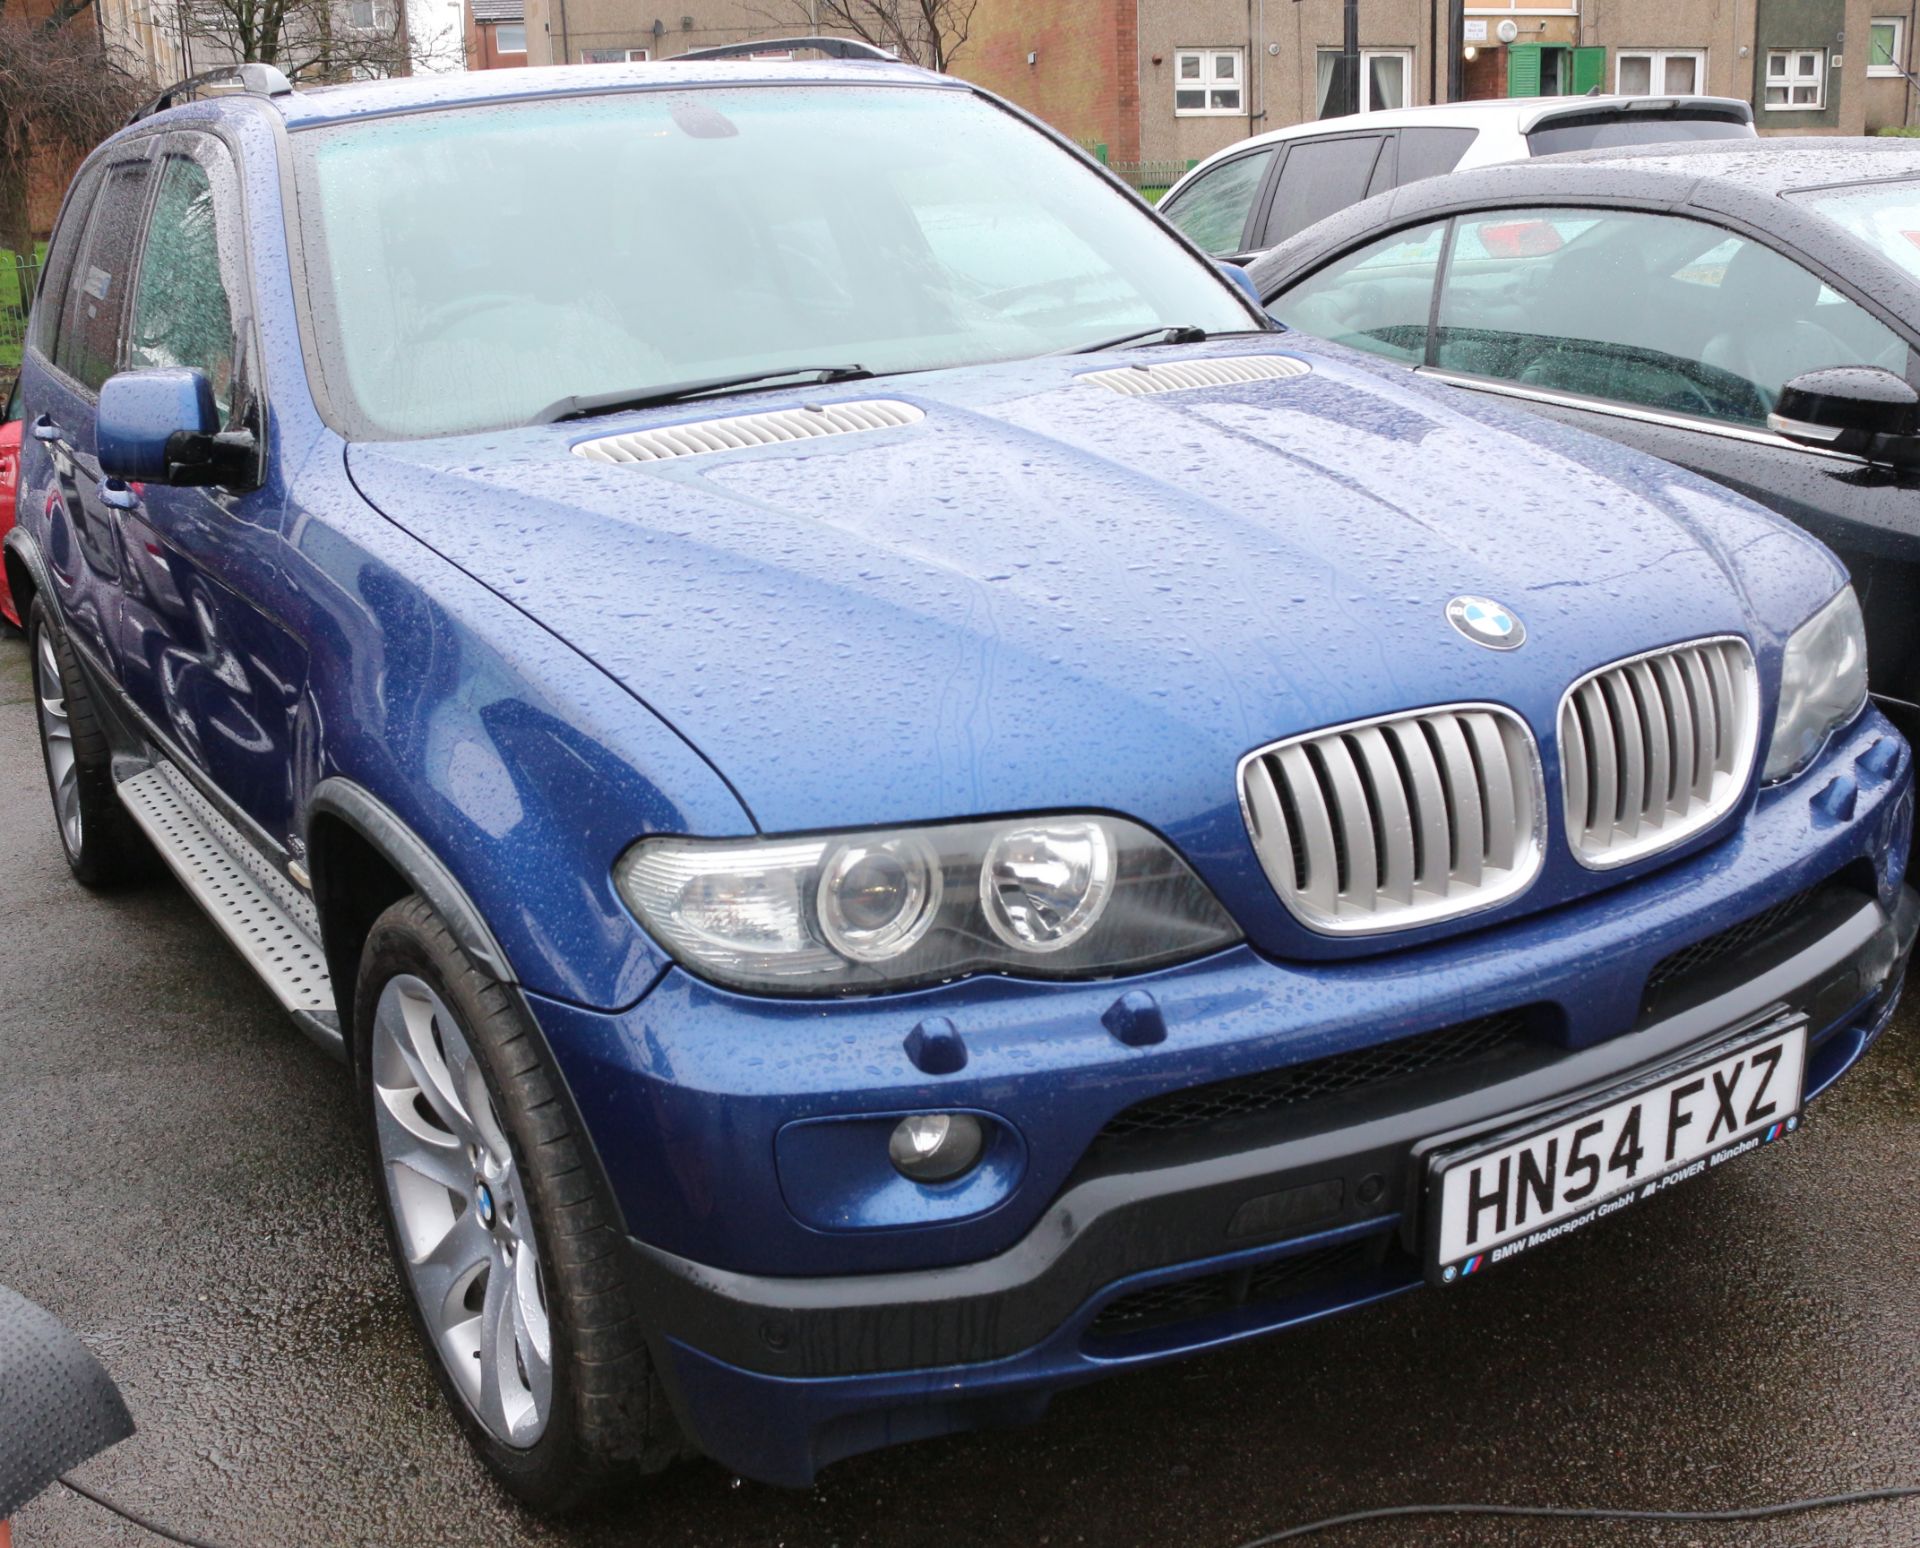 BMW X5, X5 IS FACE LIFT MODEL, HN54 FXZ, 4-8 IS, PETROL, AUTOMATIC, 2004, 5 DOOR, CURRENT RECORDED - Image 2 of 15